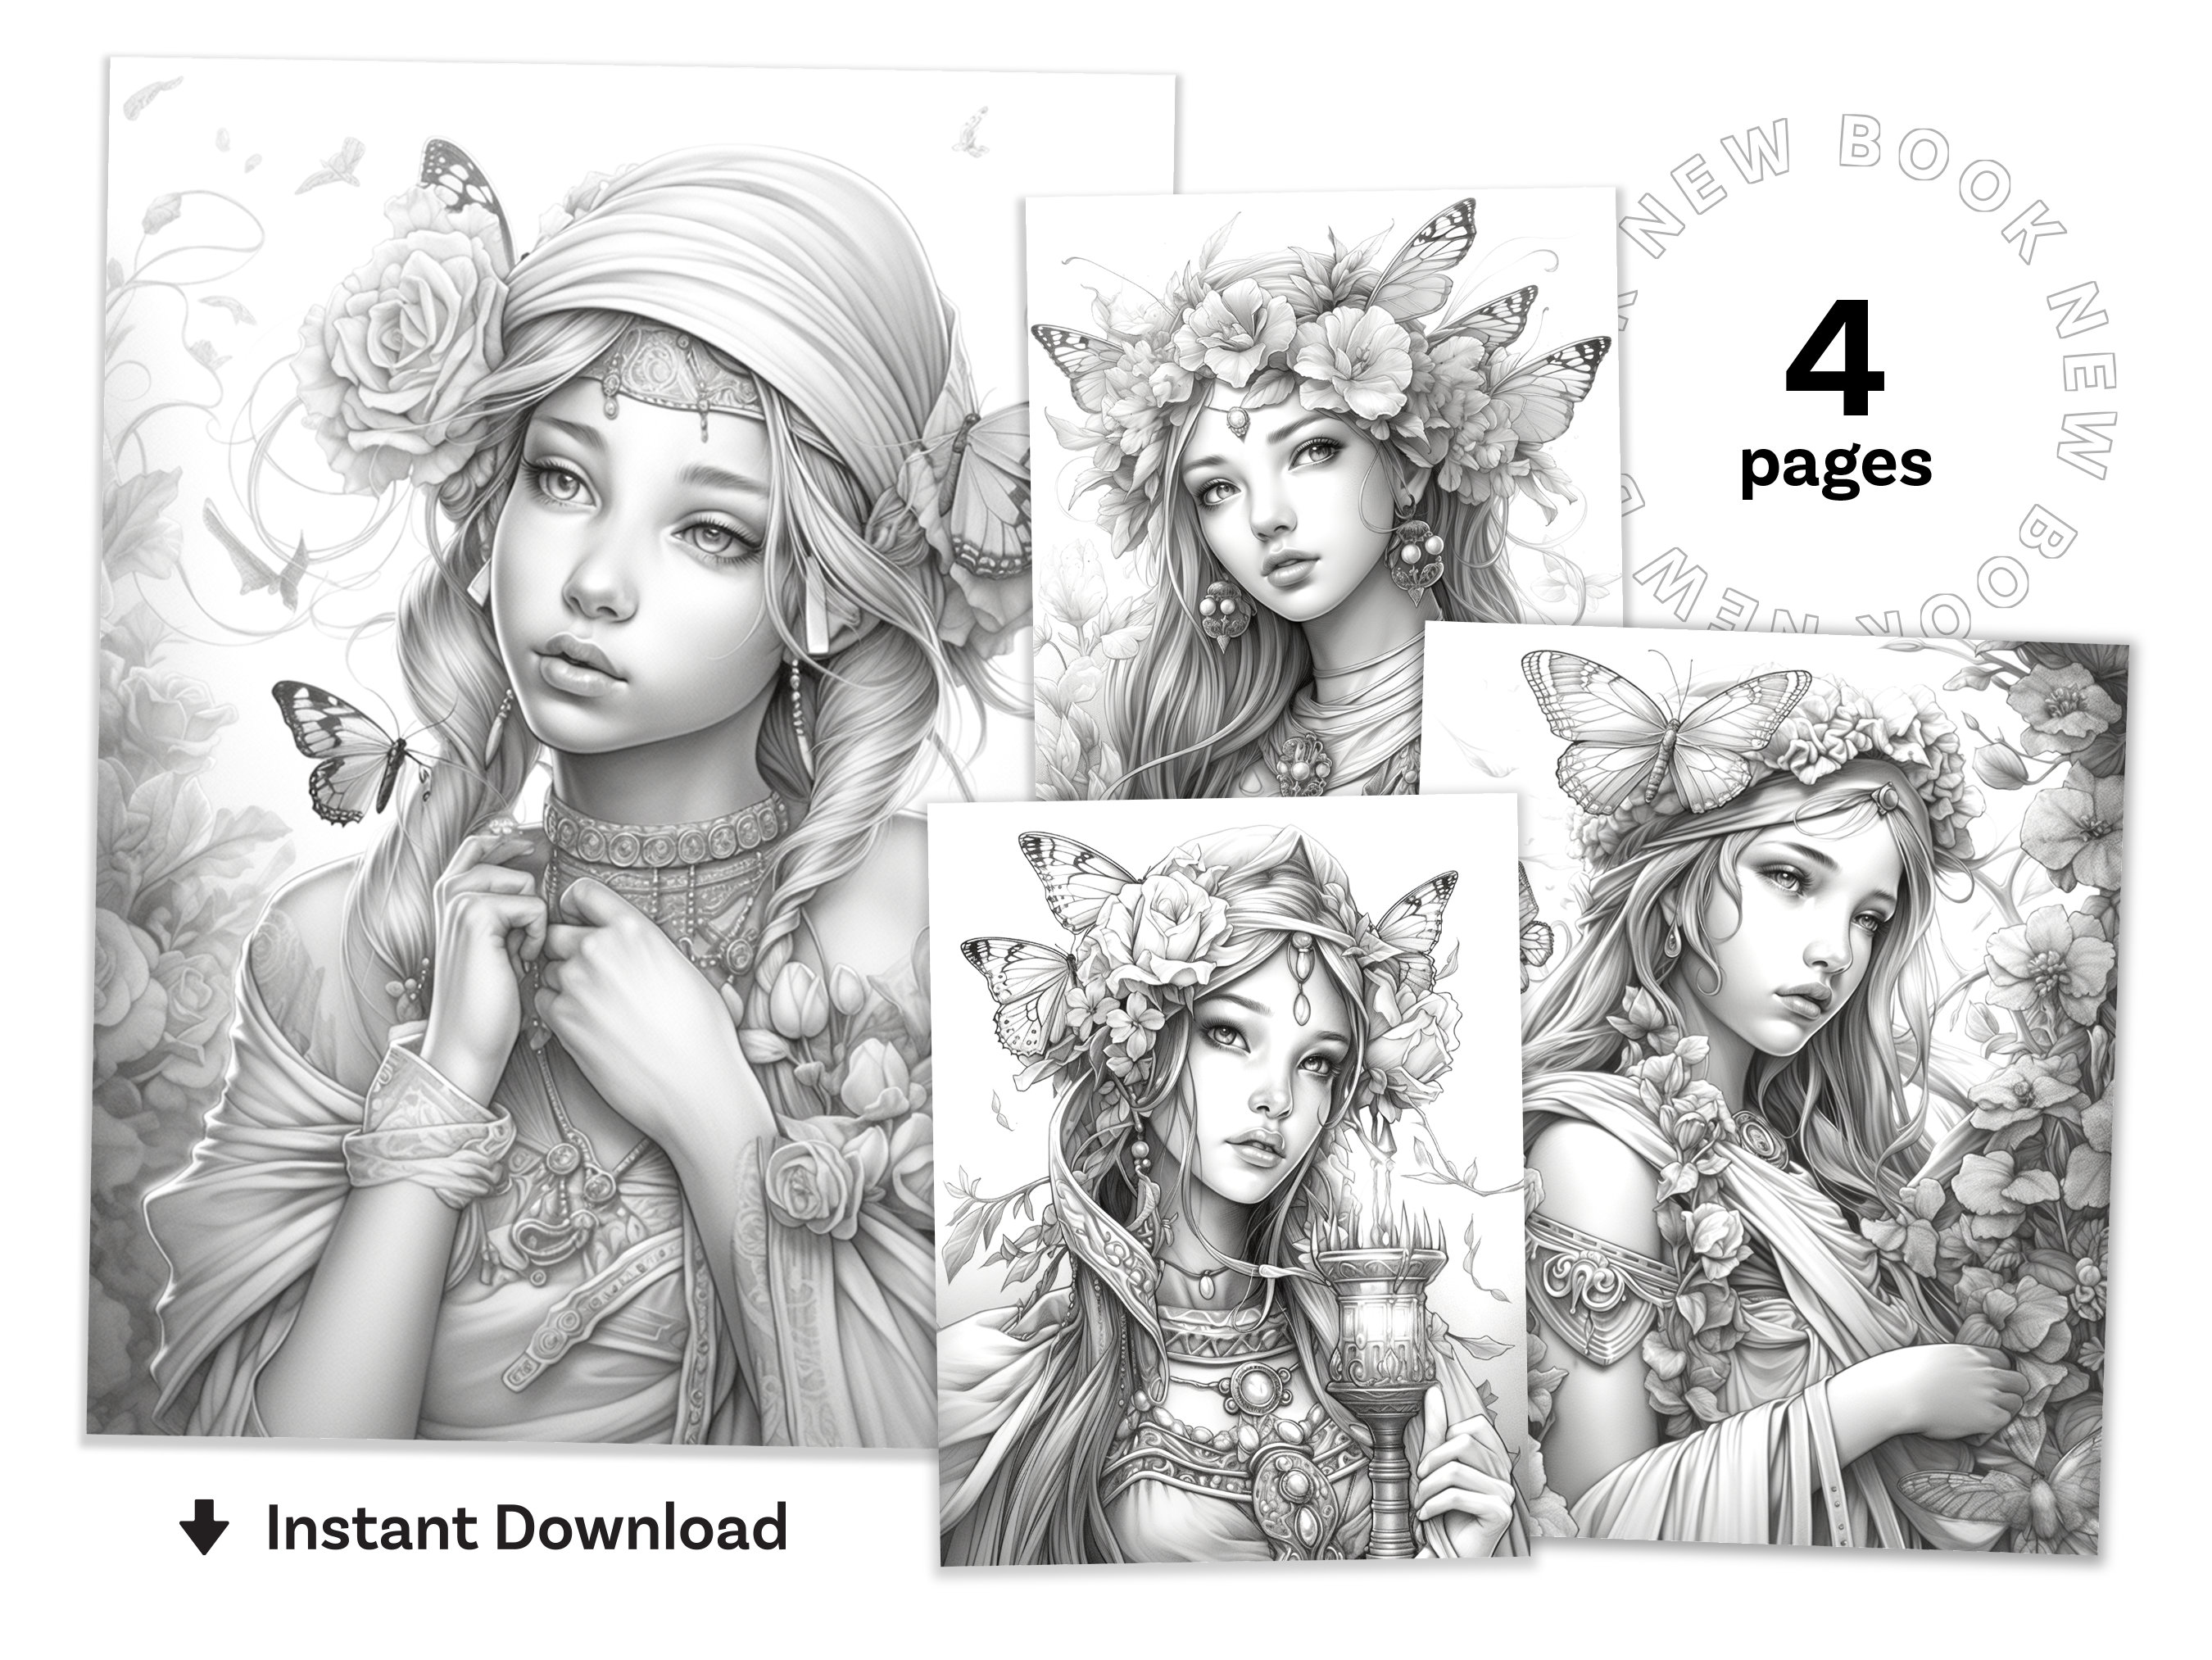 28 Magical Fairies Coloring Pages, Adults Kids Instant Download, Grayscale,  Gift, Printable Art, Fall Mandala Floral Coloring Books PDF 